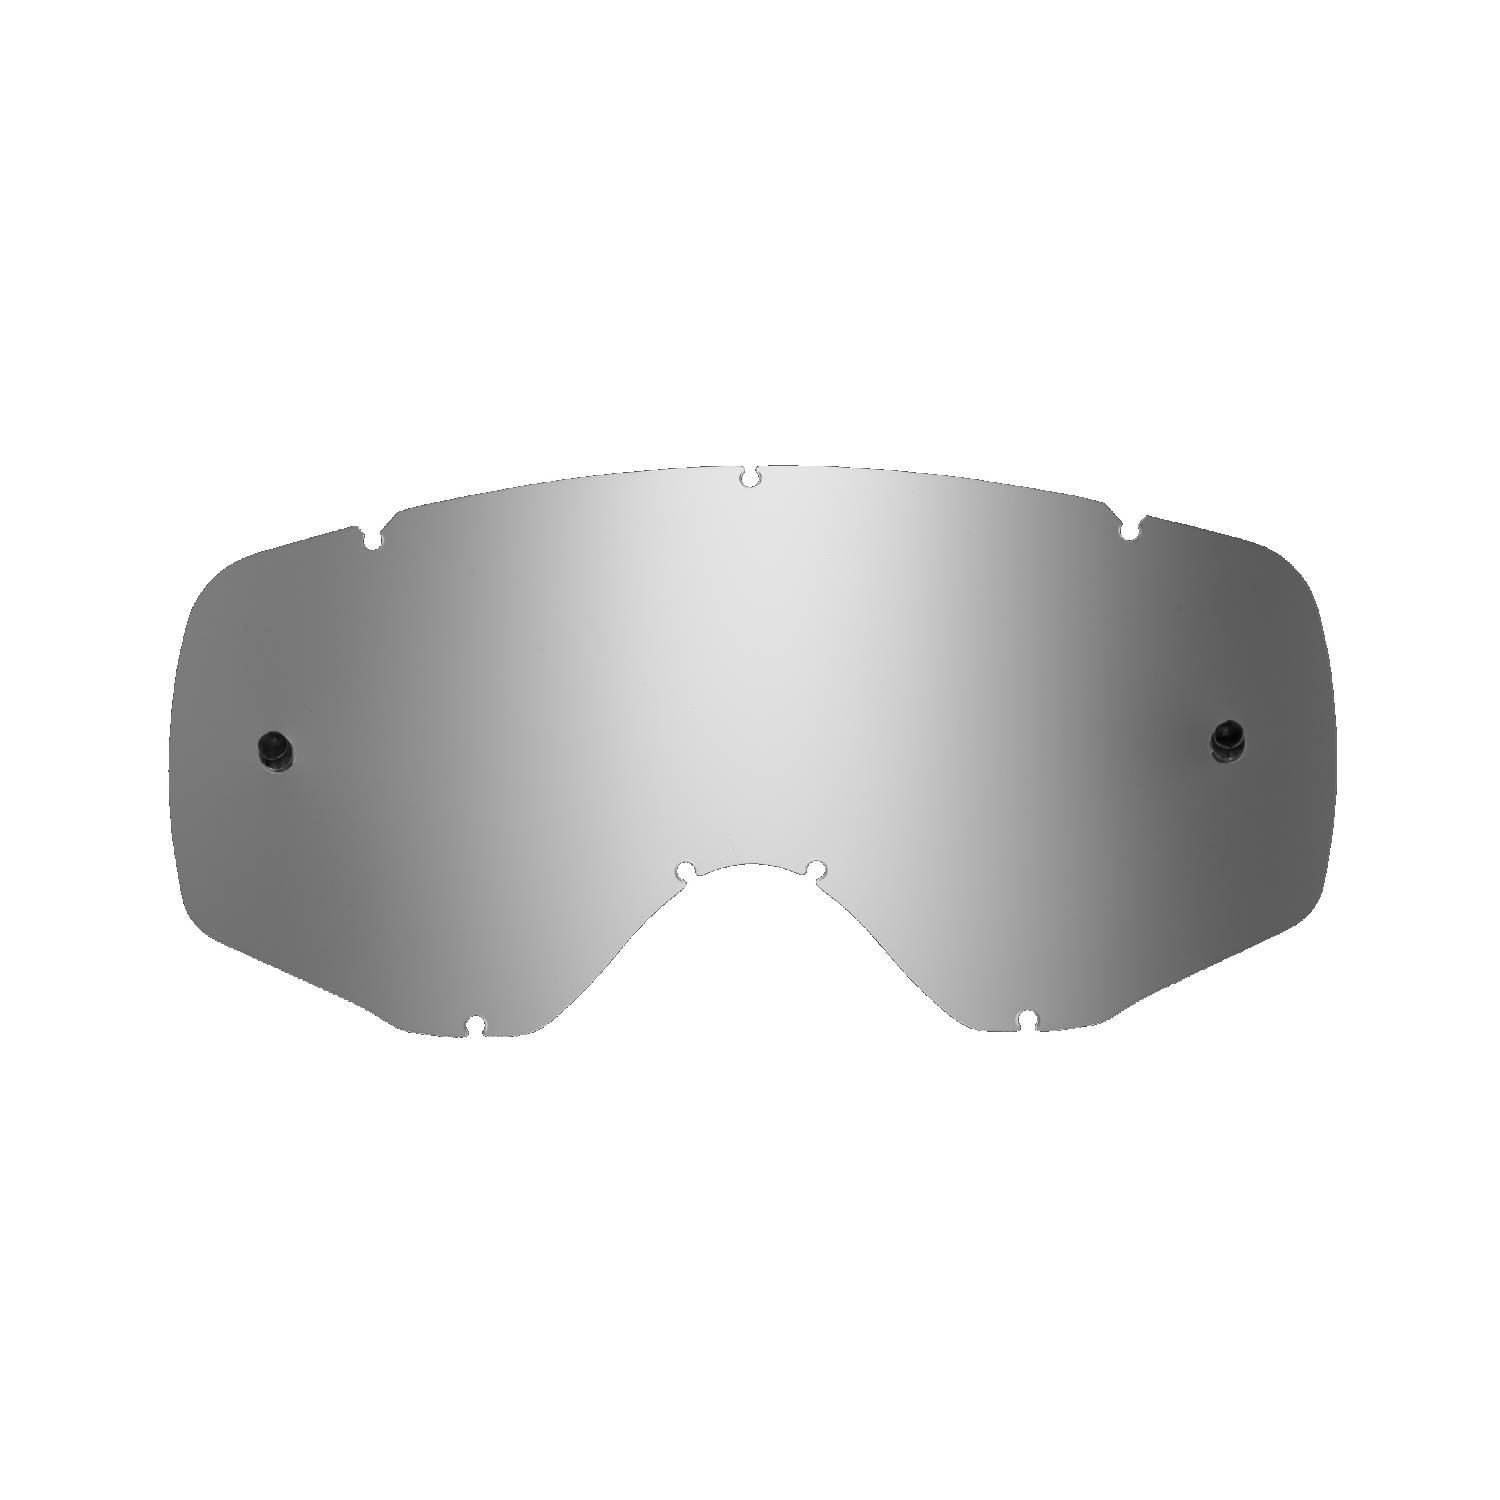 silver-toned mirrored replacement lenses compatible for Ethen Zerosei GP/ Basic / Evolution/ Mud Mask mx goggle